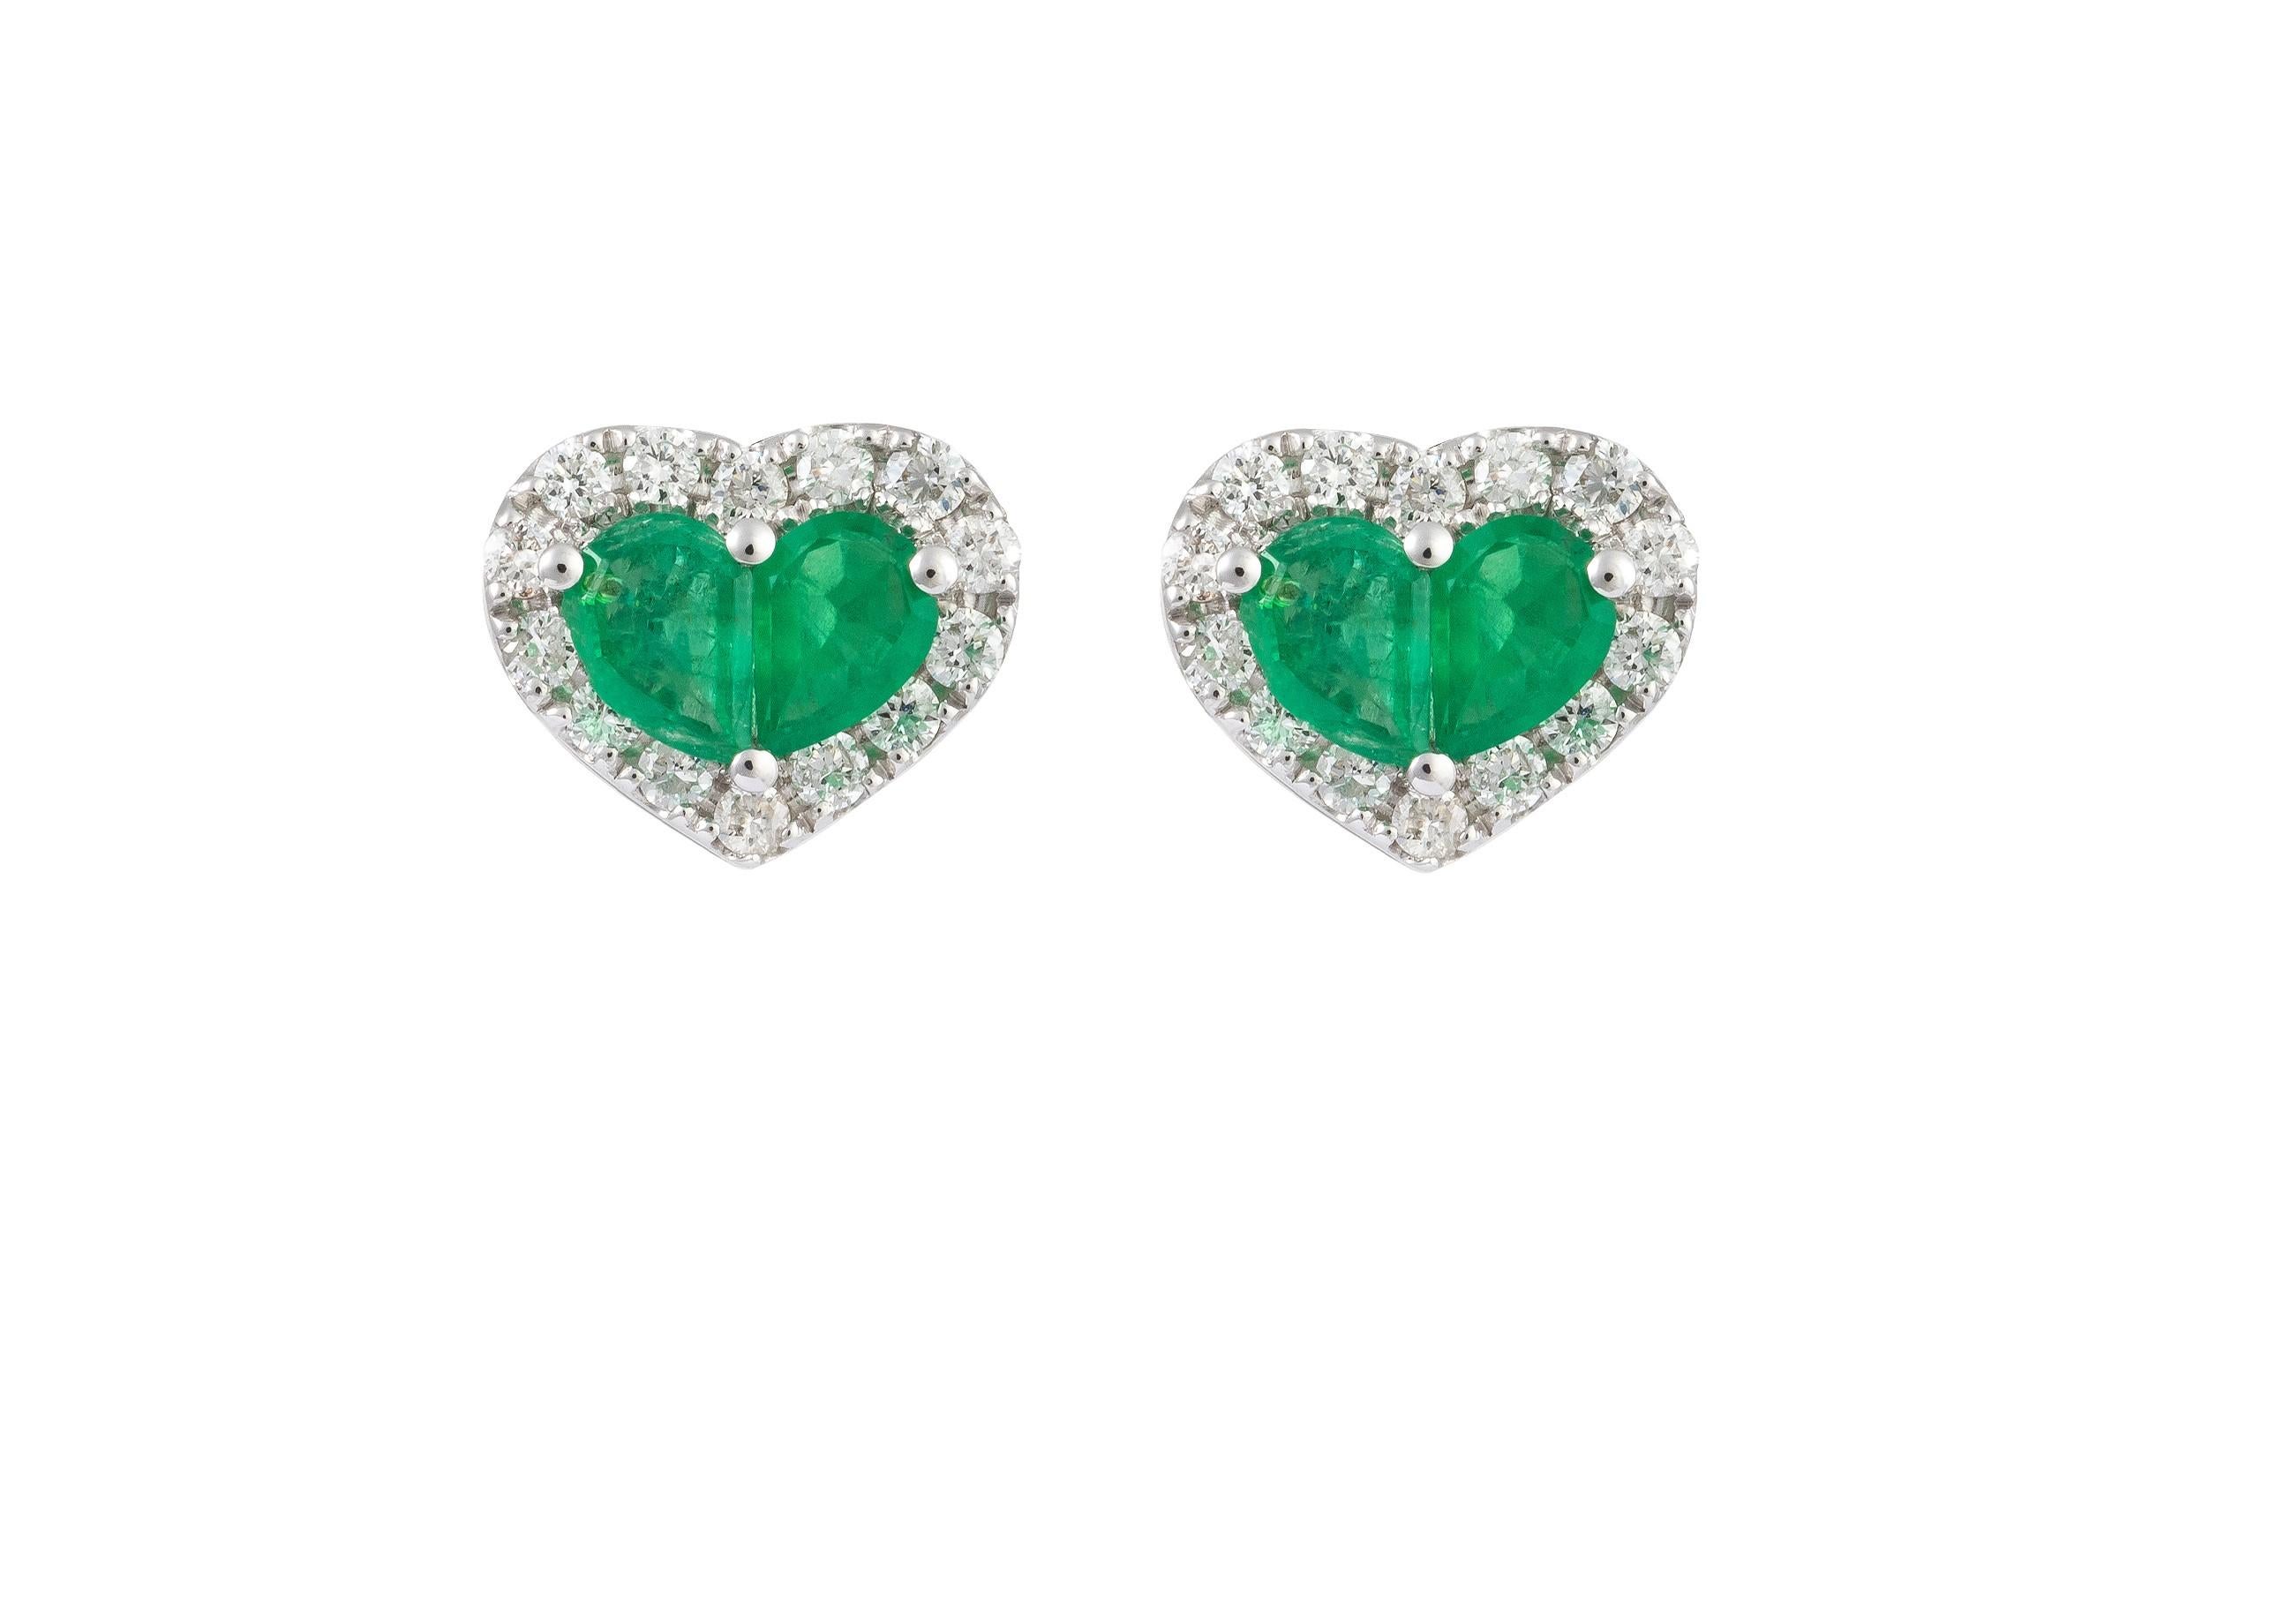 The Following Item we are offering is a Rare Important Radiant 18KT Gold Large Rare Gorgeous Fancy Green Emerald and Diamond Heart Stud Earrings. Earrings are comprised of Beautiful Glittering Sapphires and Gorgeous Diamonds!!! T.C.W. Approx 1CT!!!